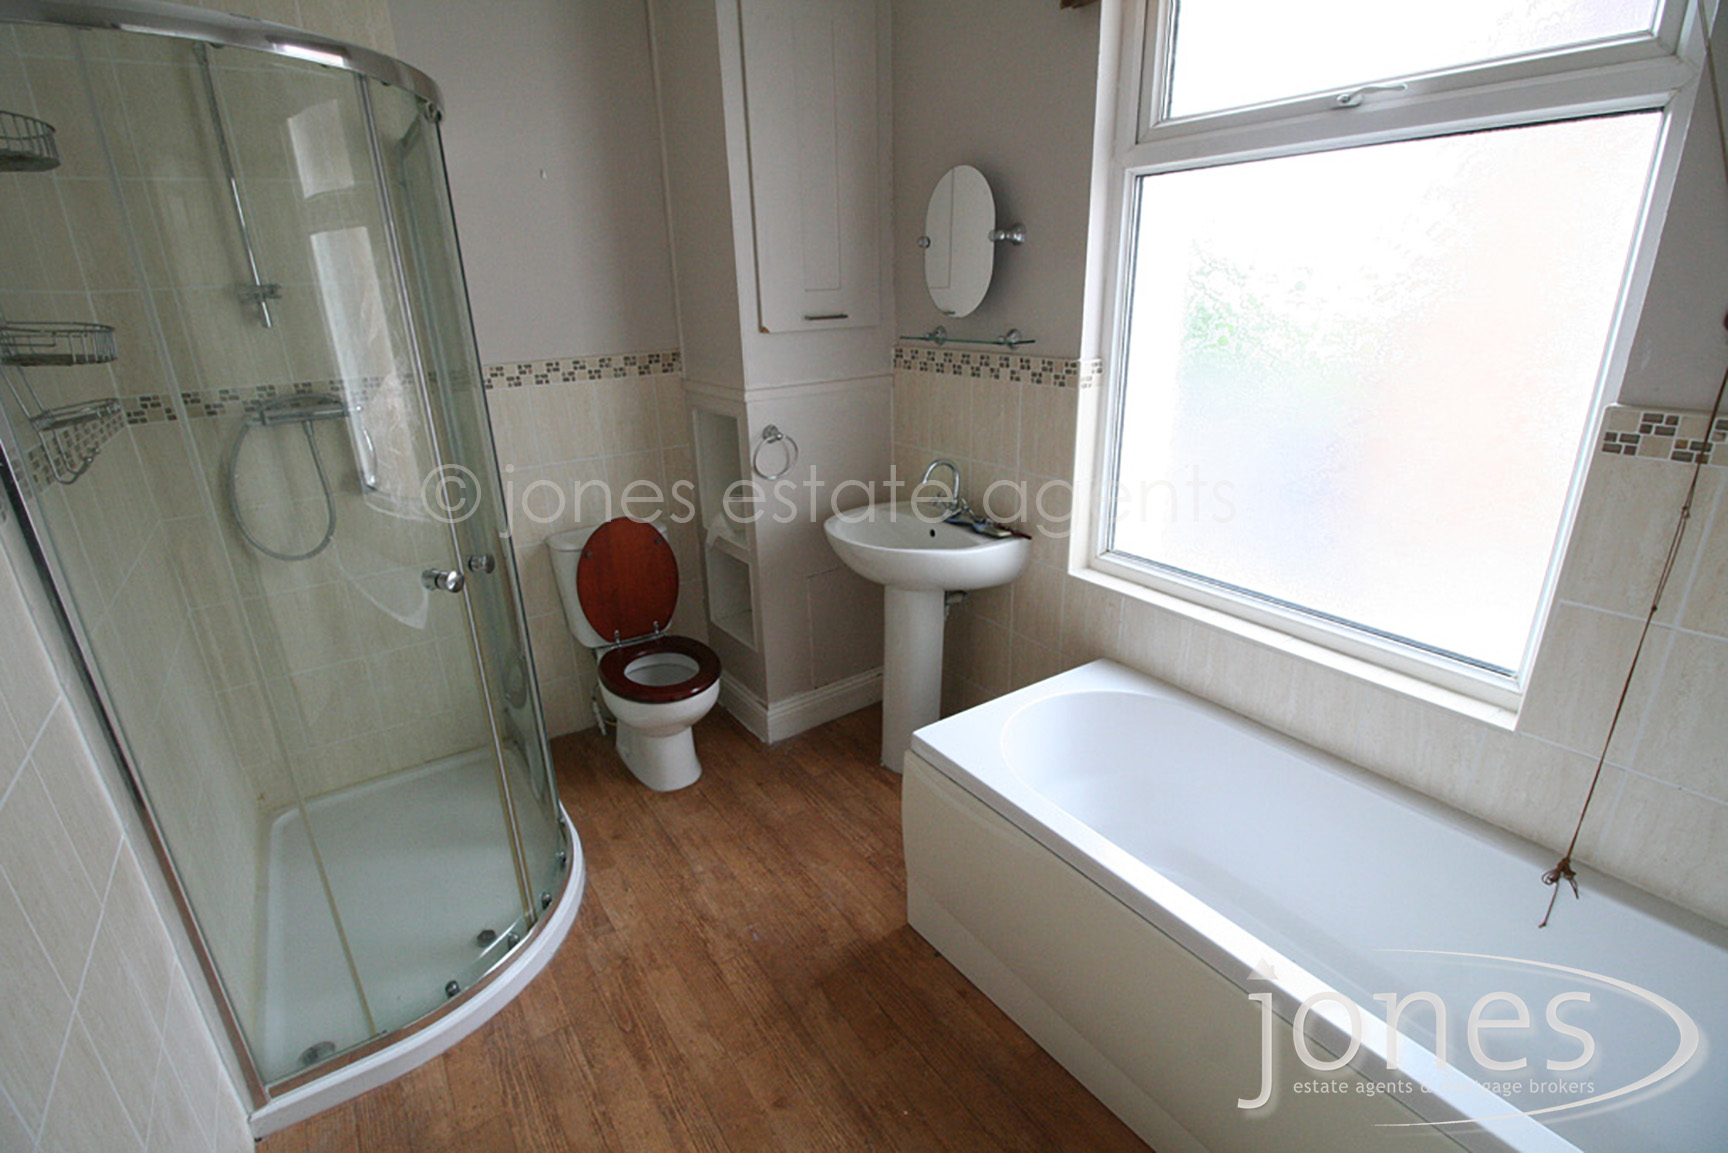 Home for Sale Let - Photo 07 St Cuthberts Road, Stockton on tees, TS18 3JW